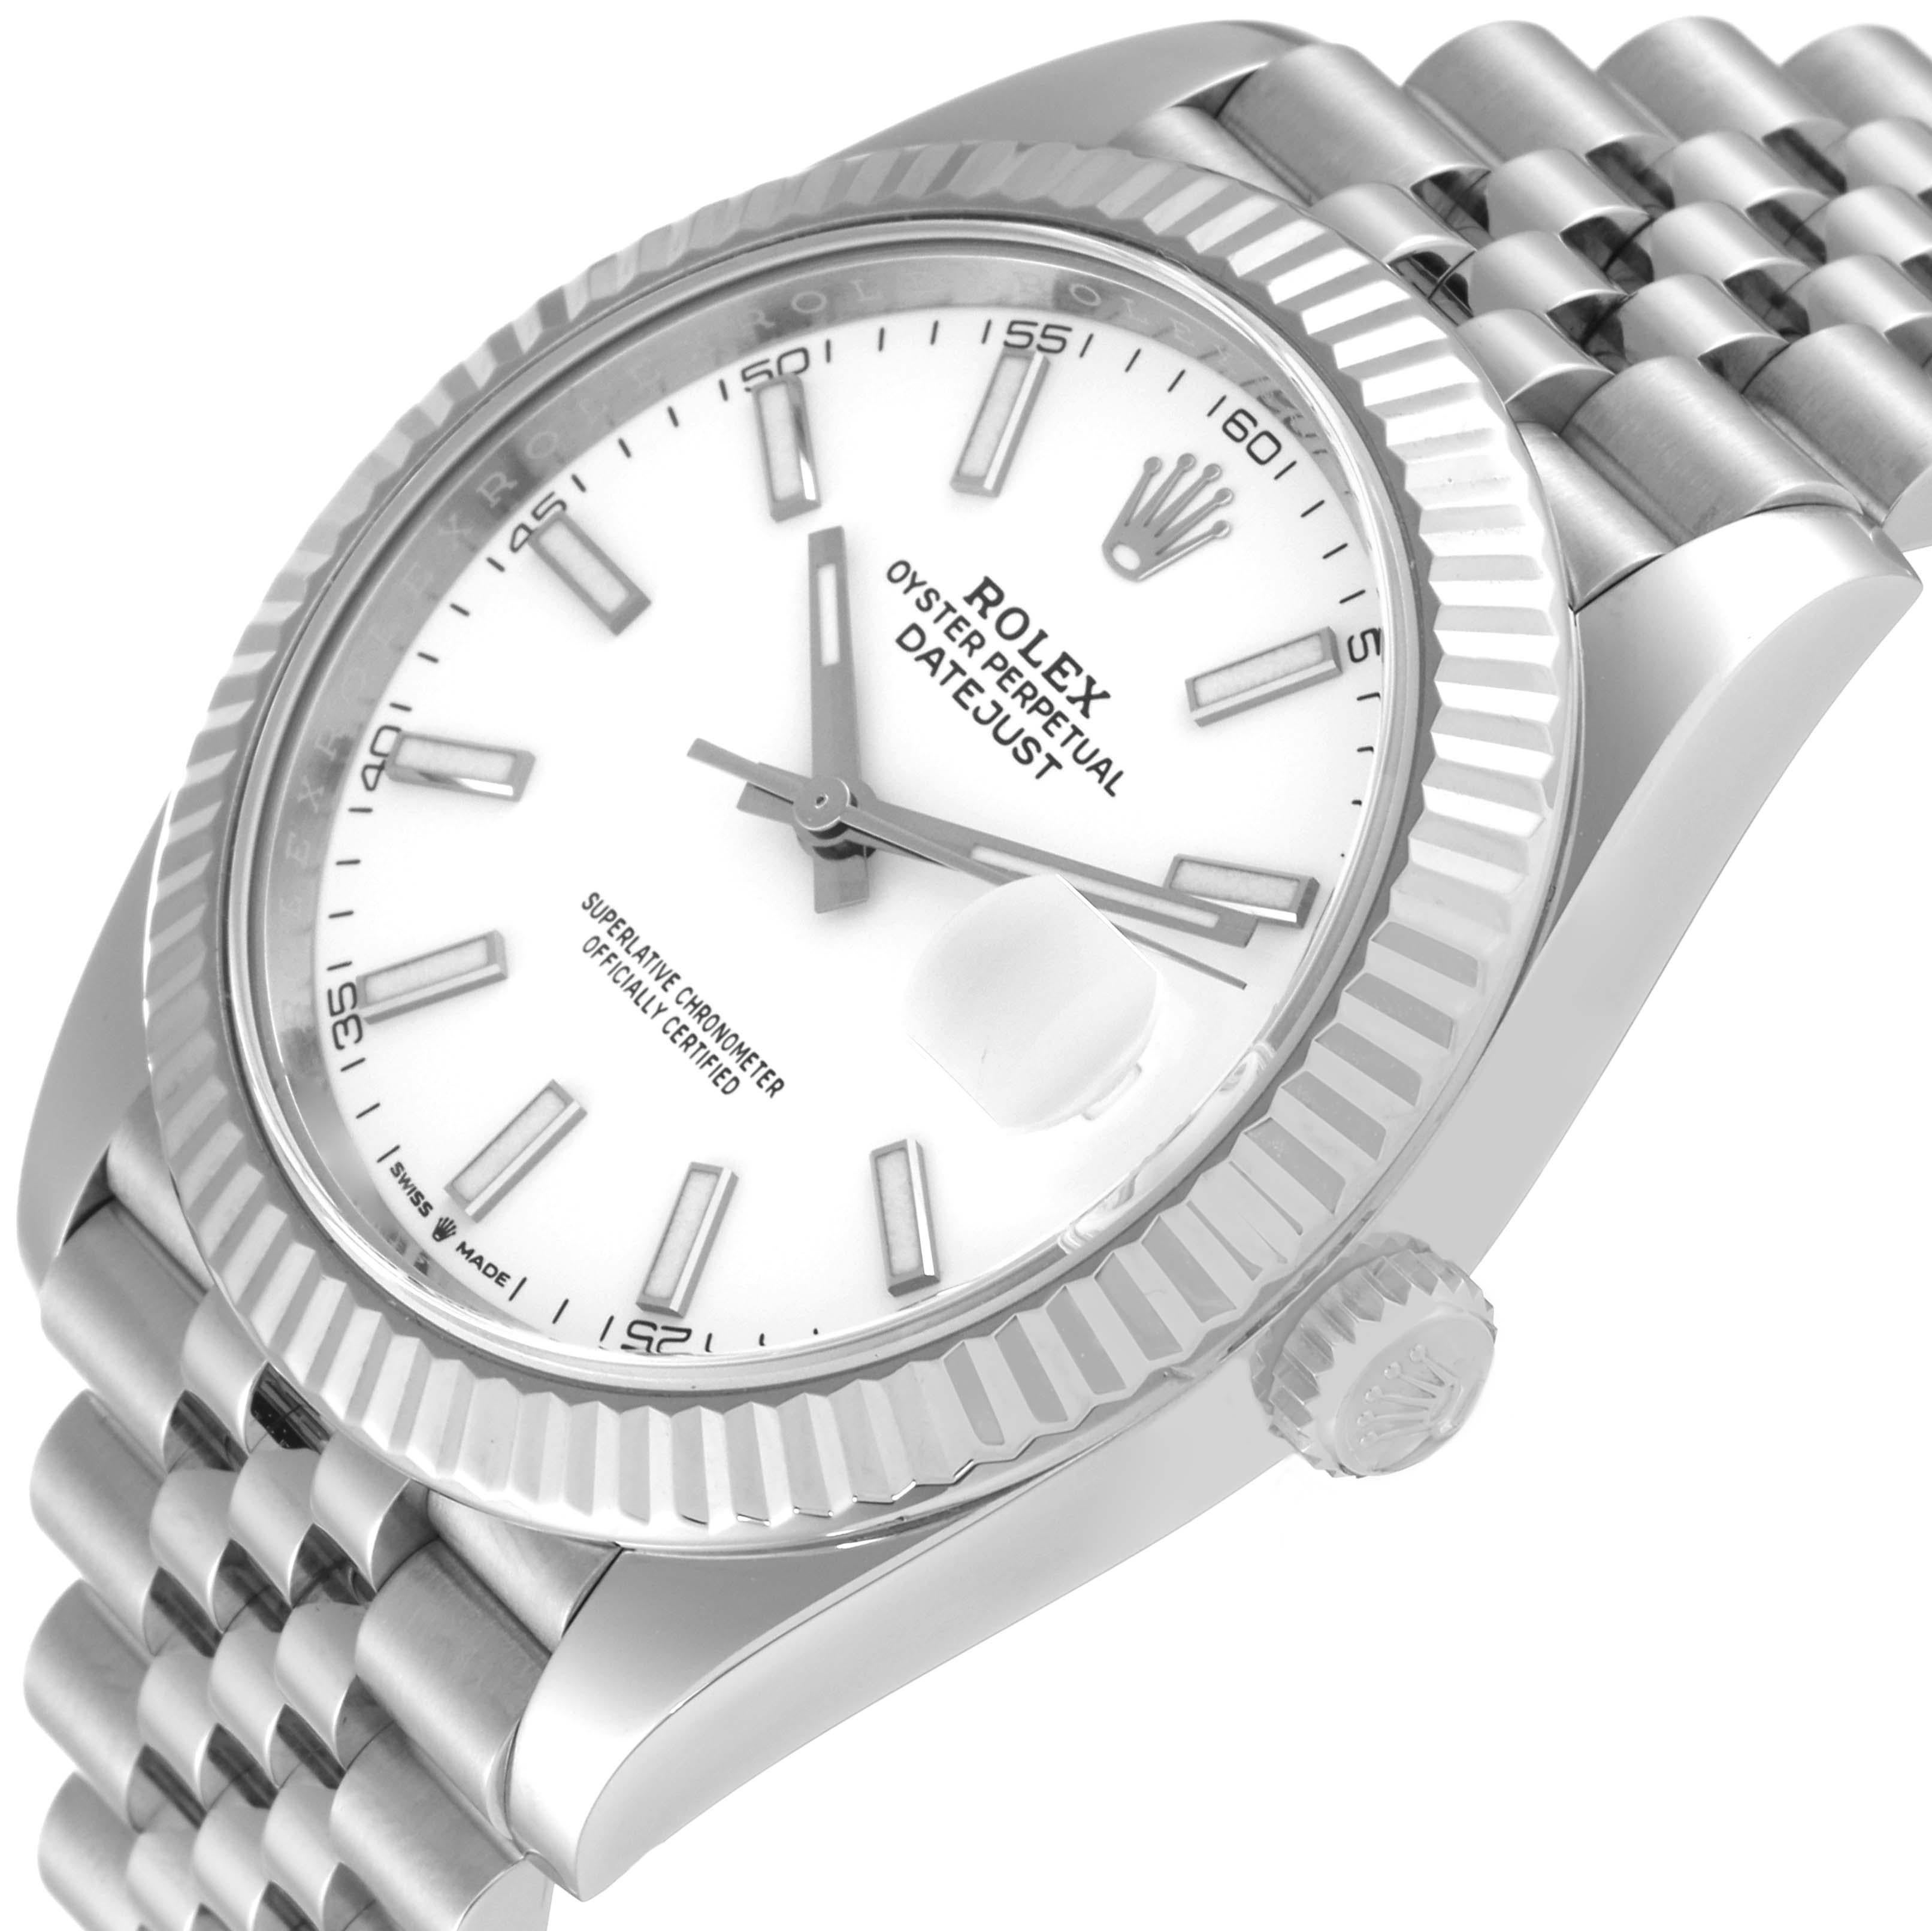 Rolex Datejust 41 White Dial Steel Mens Watch 126334 Box Card For Sale 1